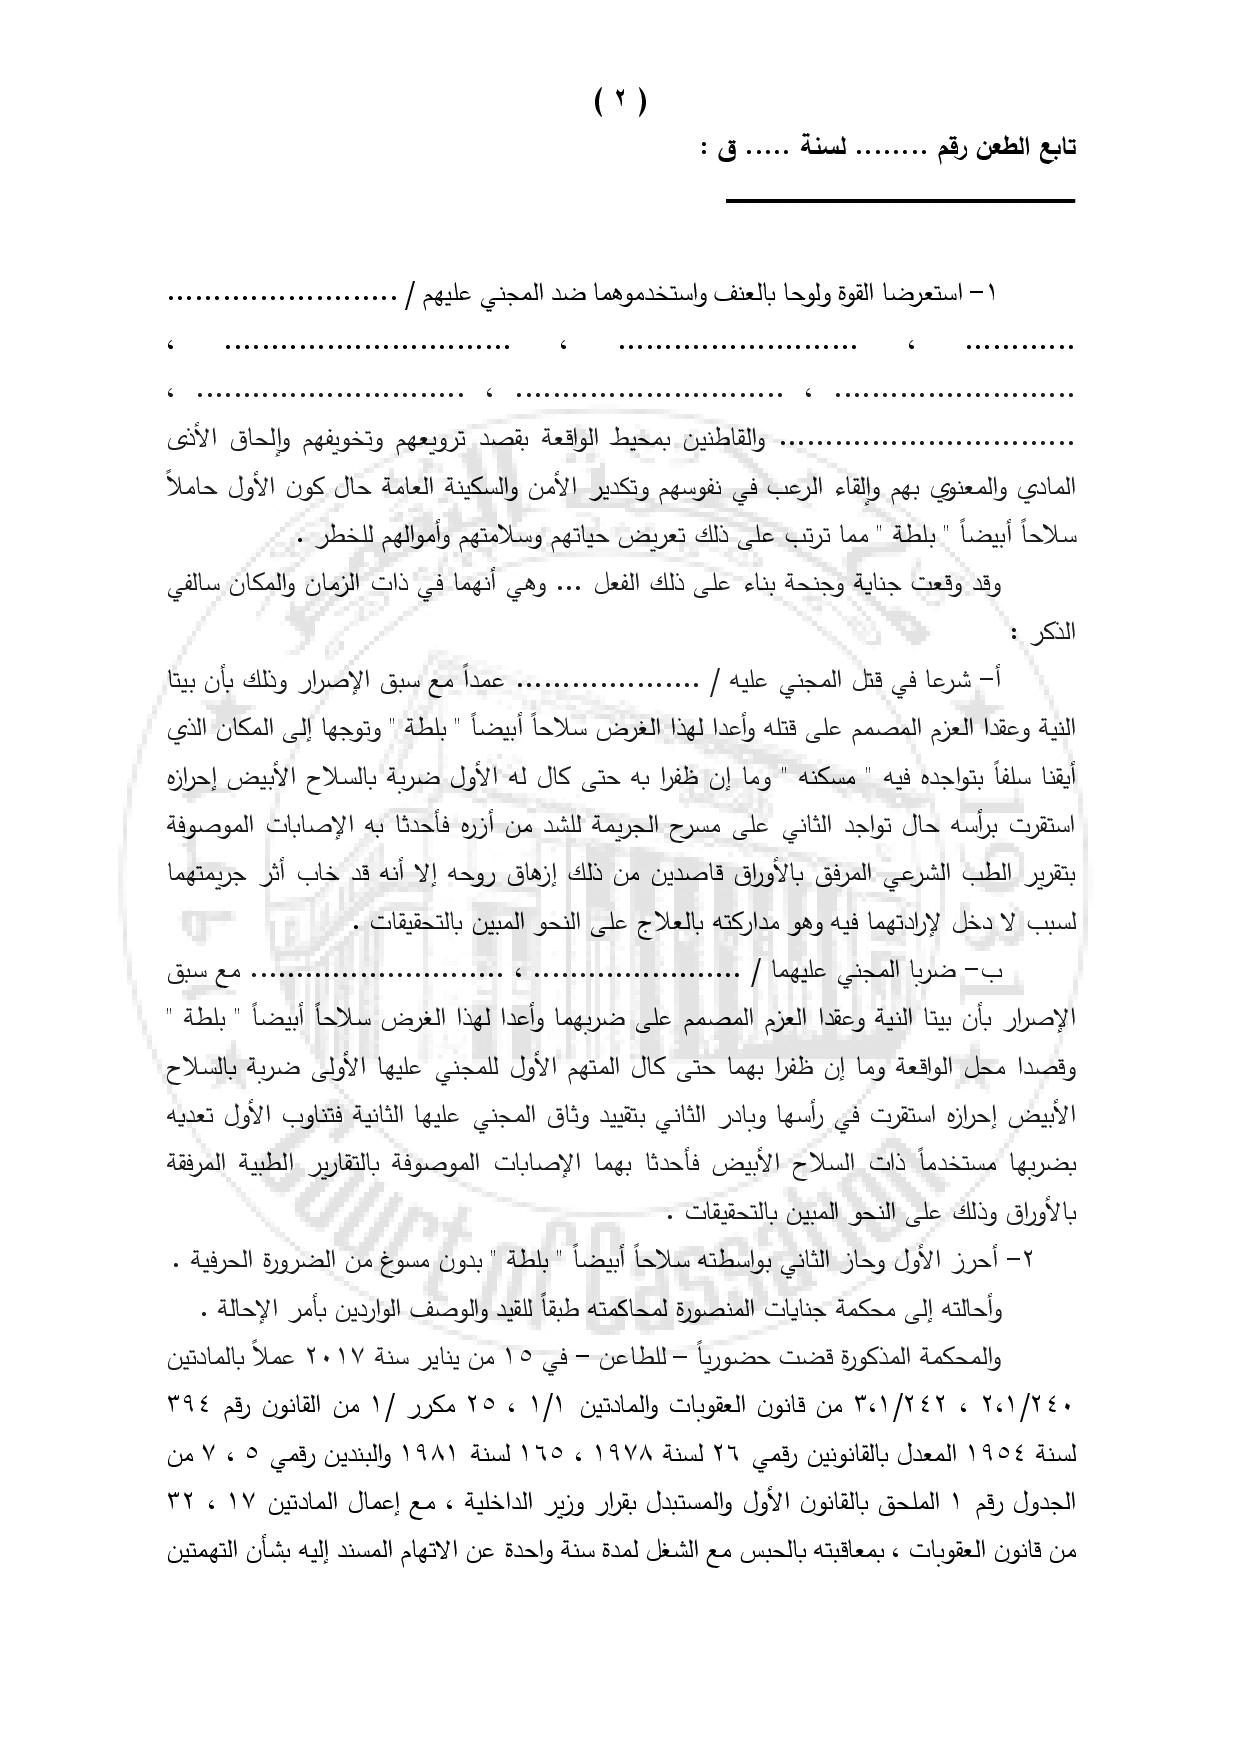 Document-page-002